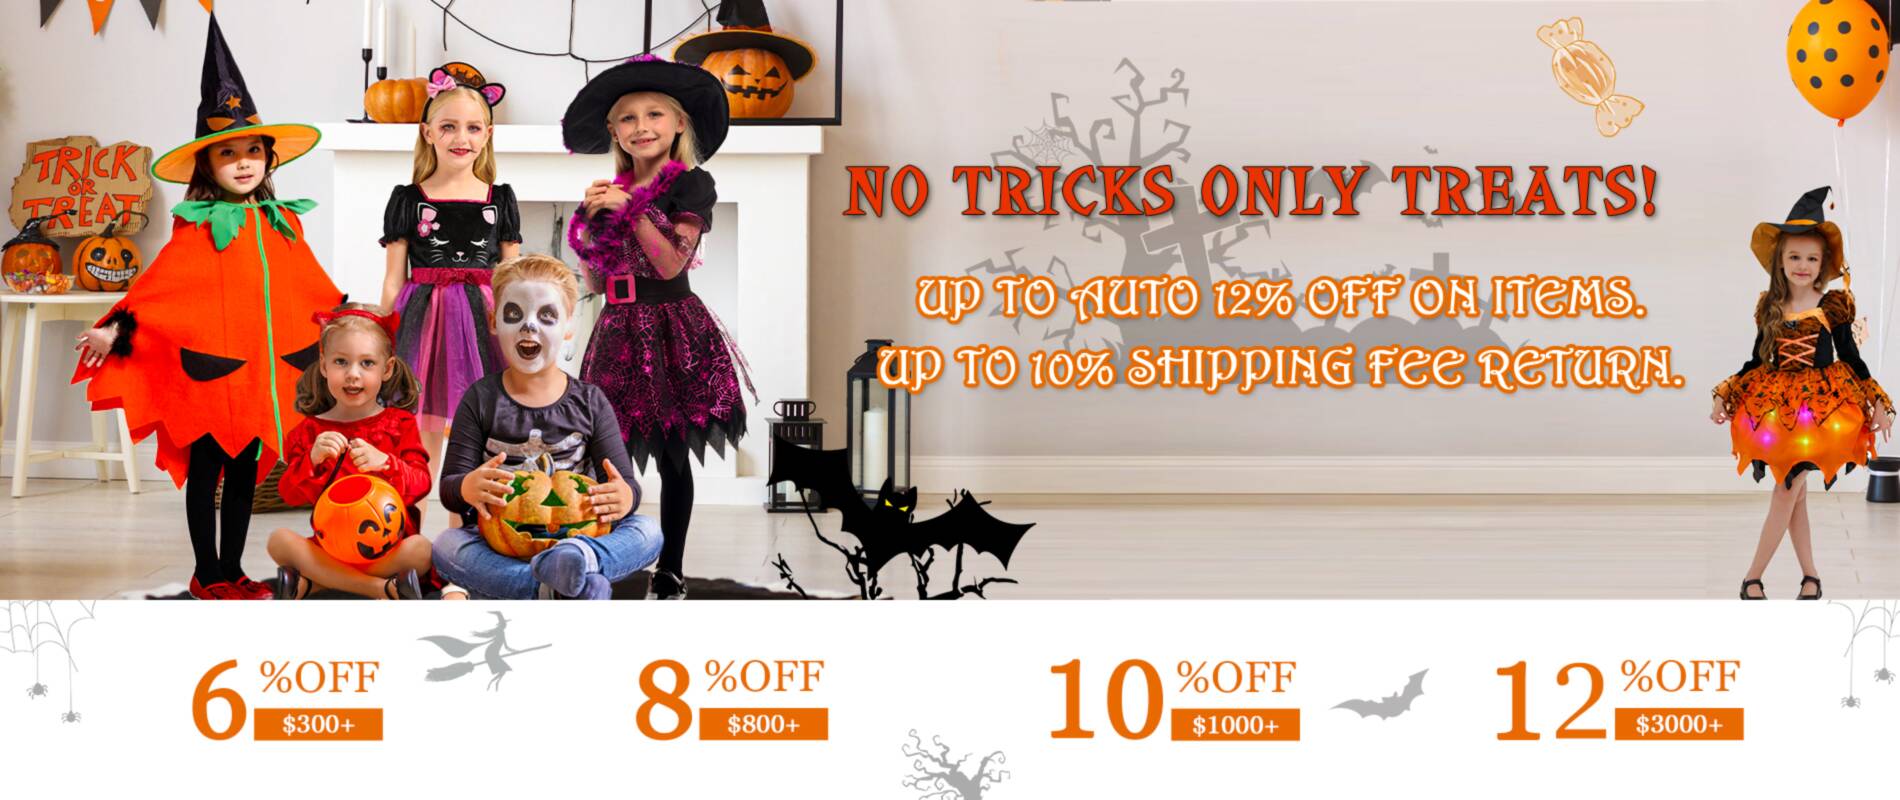 https://www.kiskissing.com/collections/occasion/holiday-wear/halloween.html